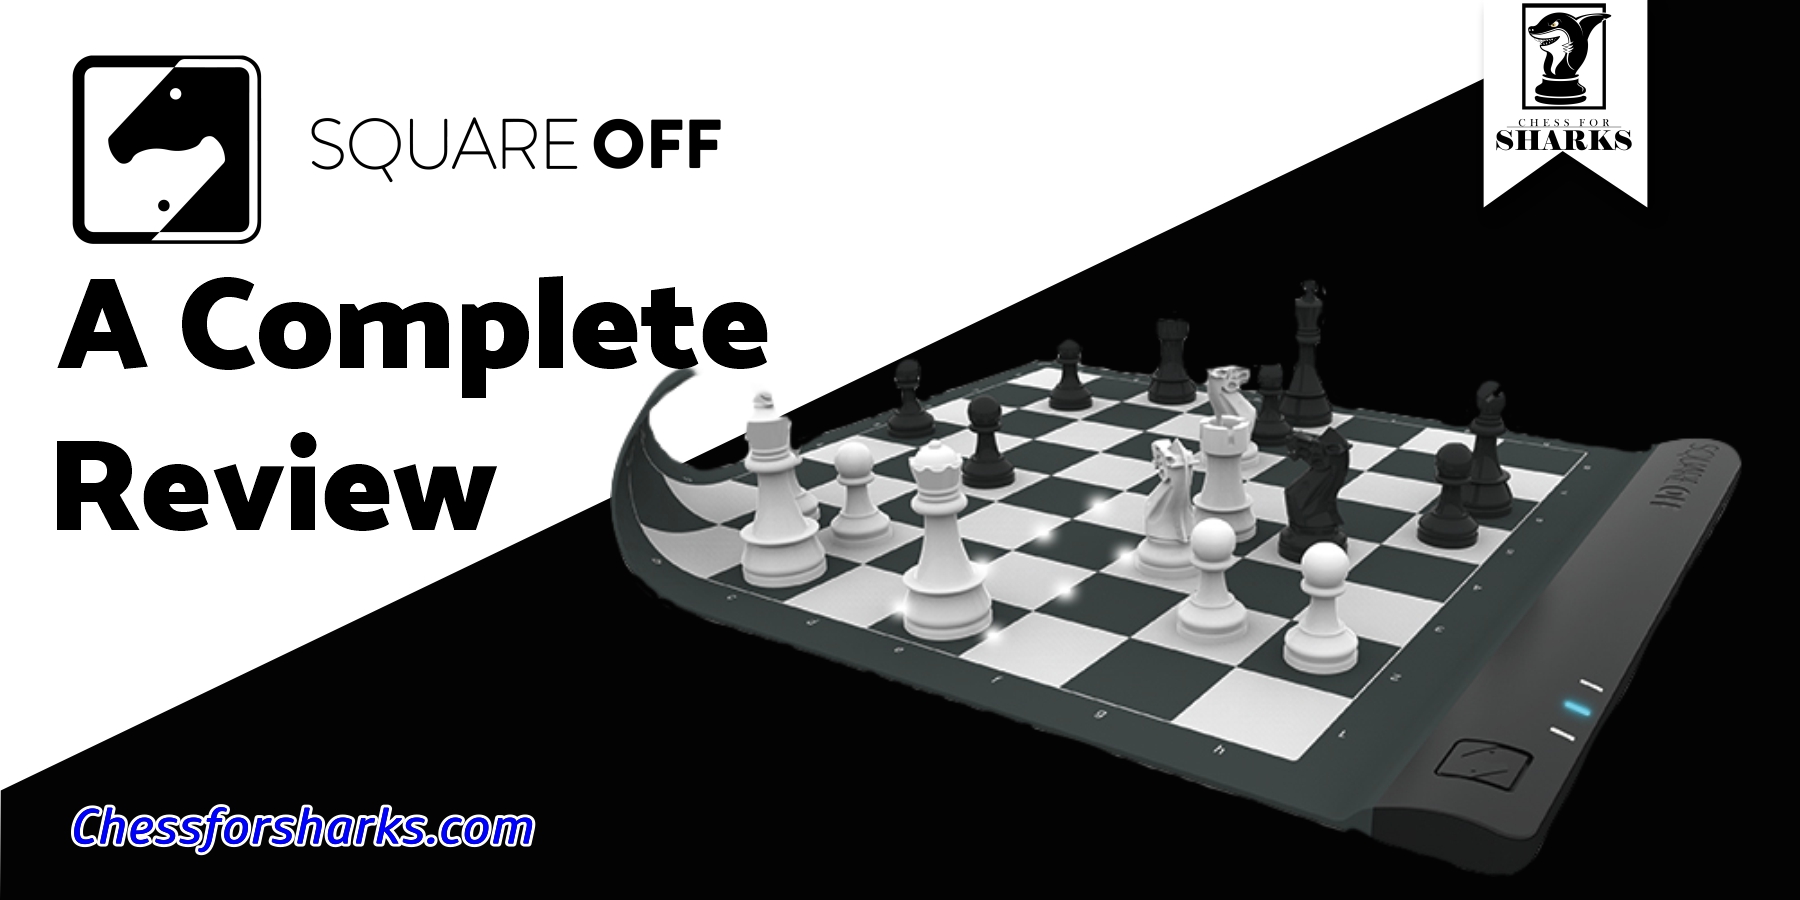 Introducing Square Off, World’s Smartest Chessboards: A Complete Review